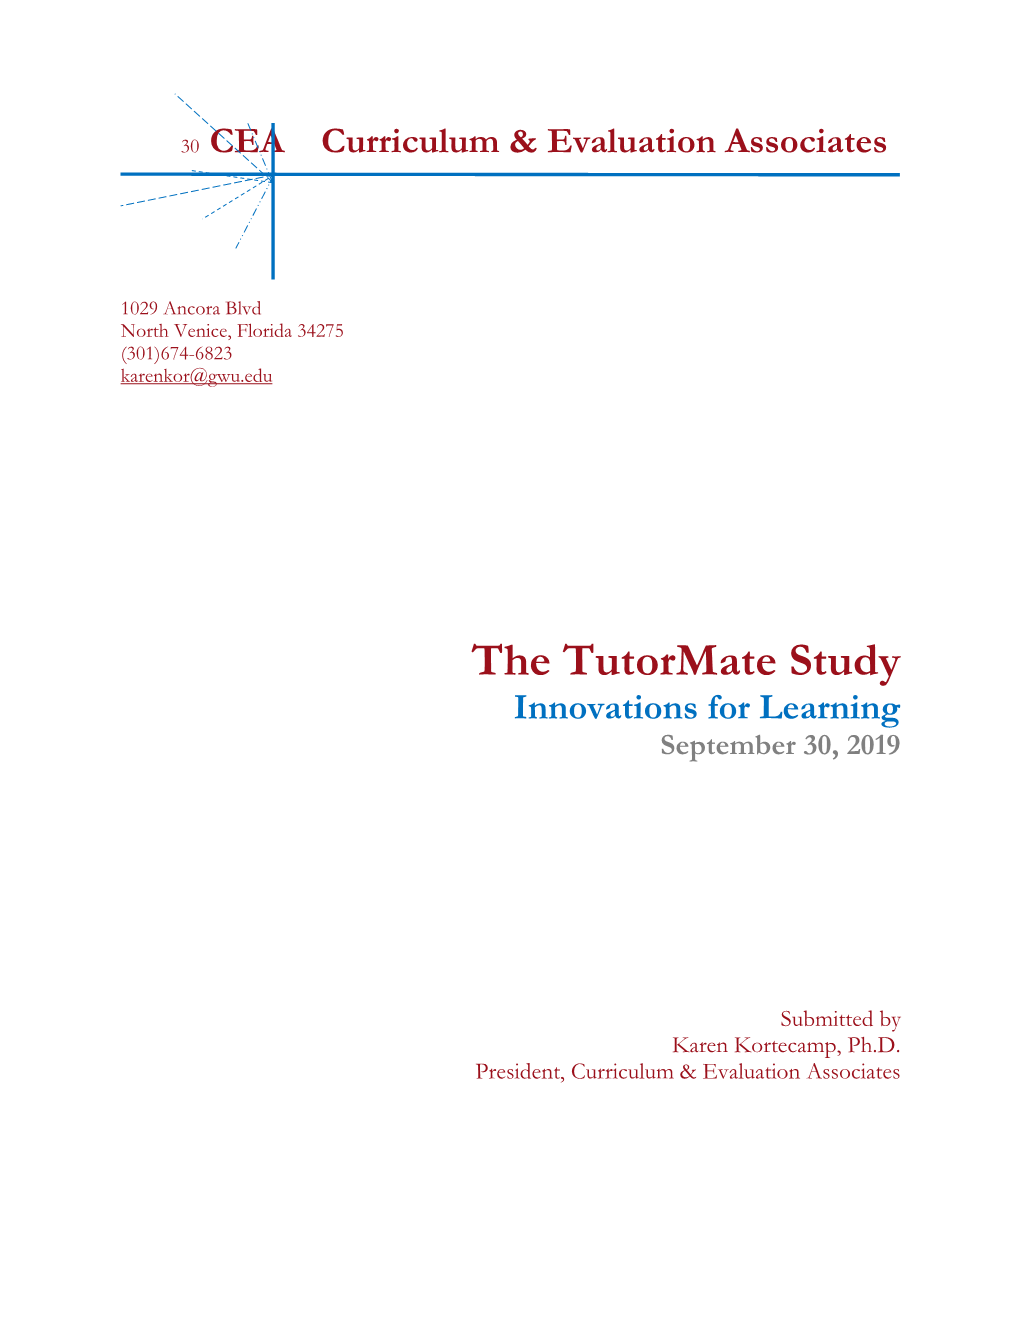 The Tutormate Study Innovations for Learning September 30, 2019